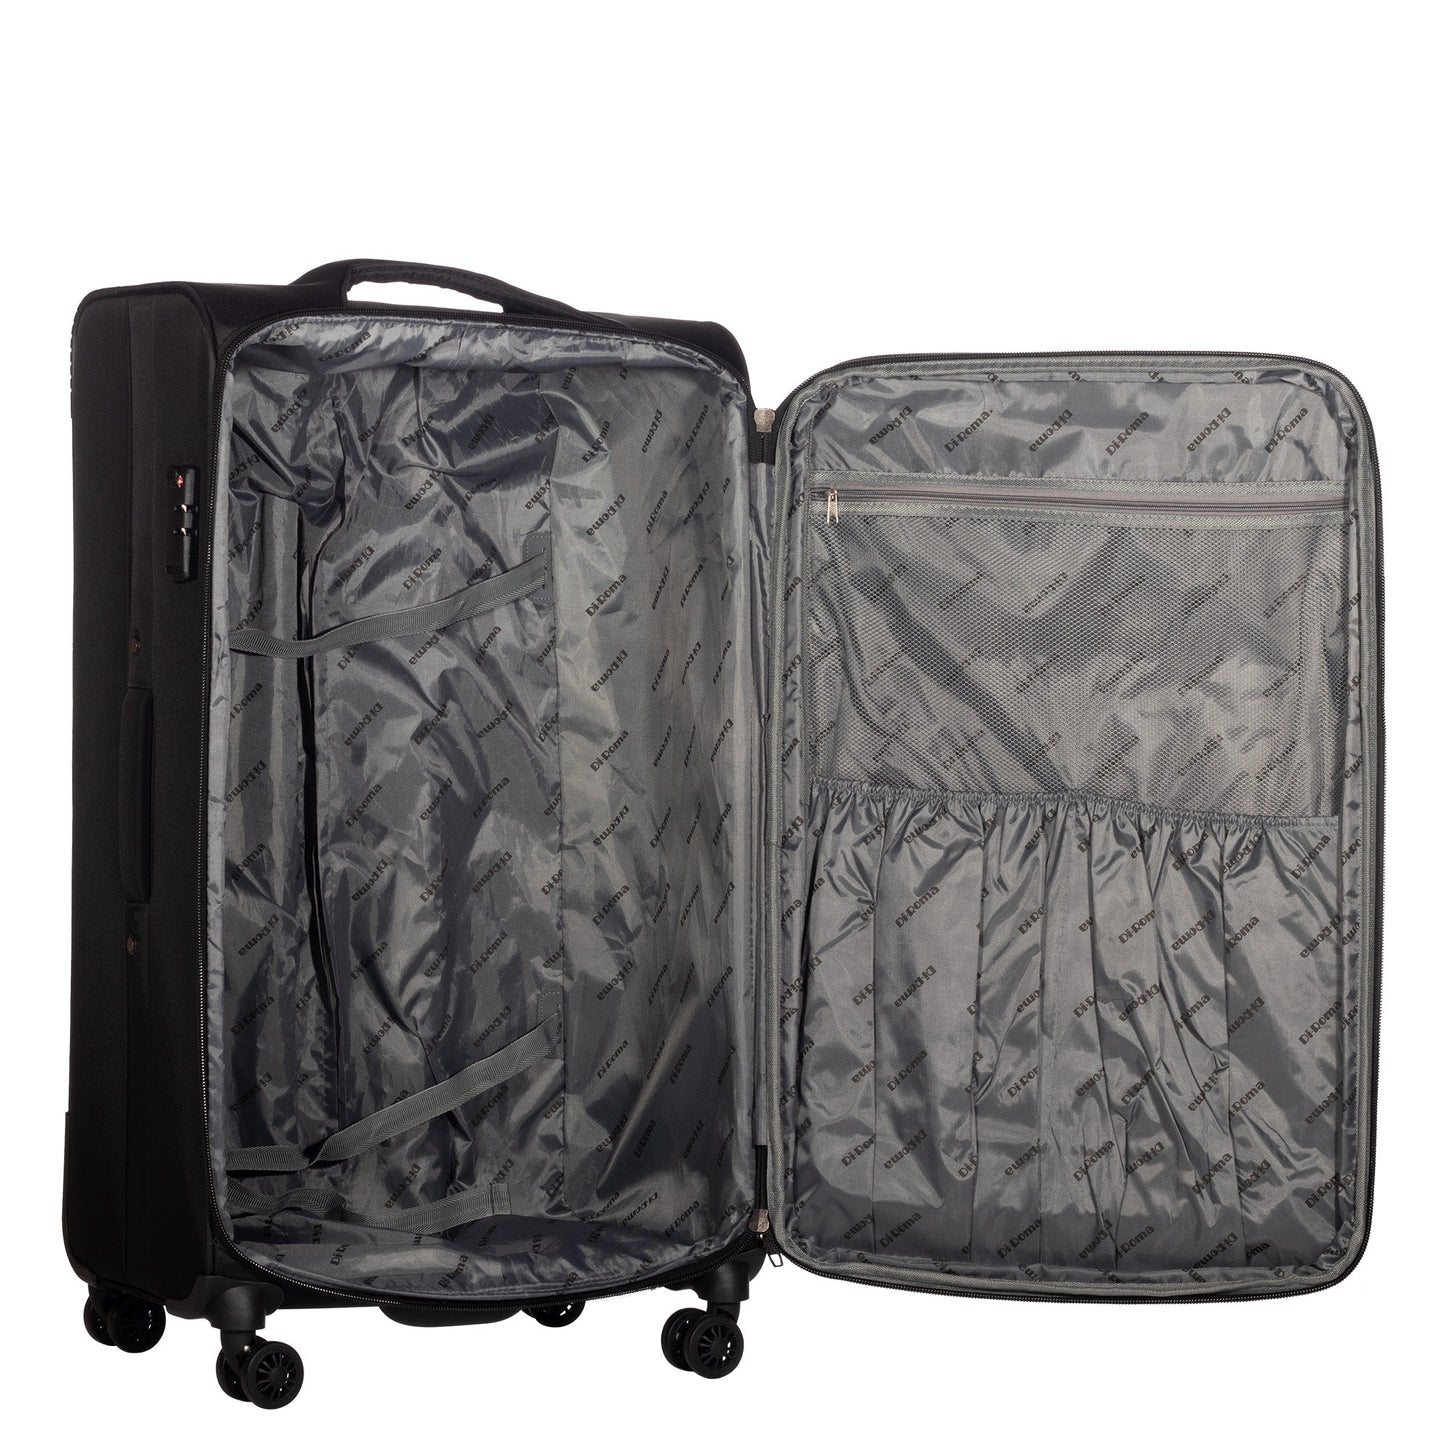 Luca Collection Black luggage (20/26/30") Suitcase